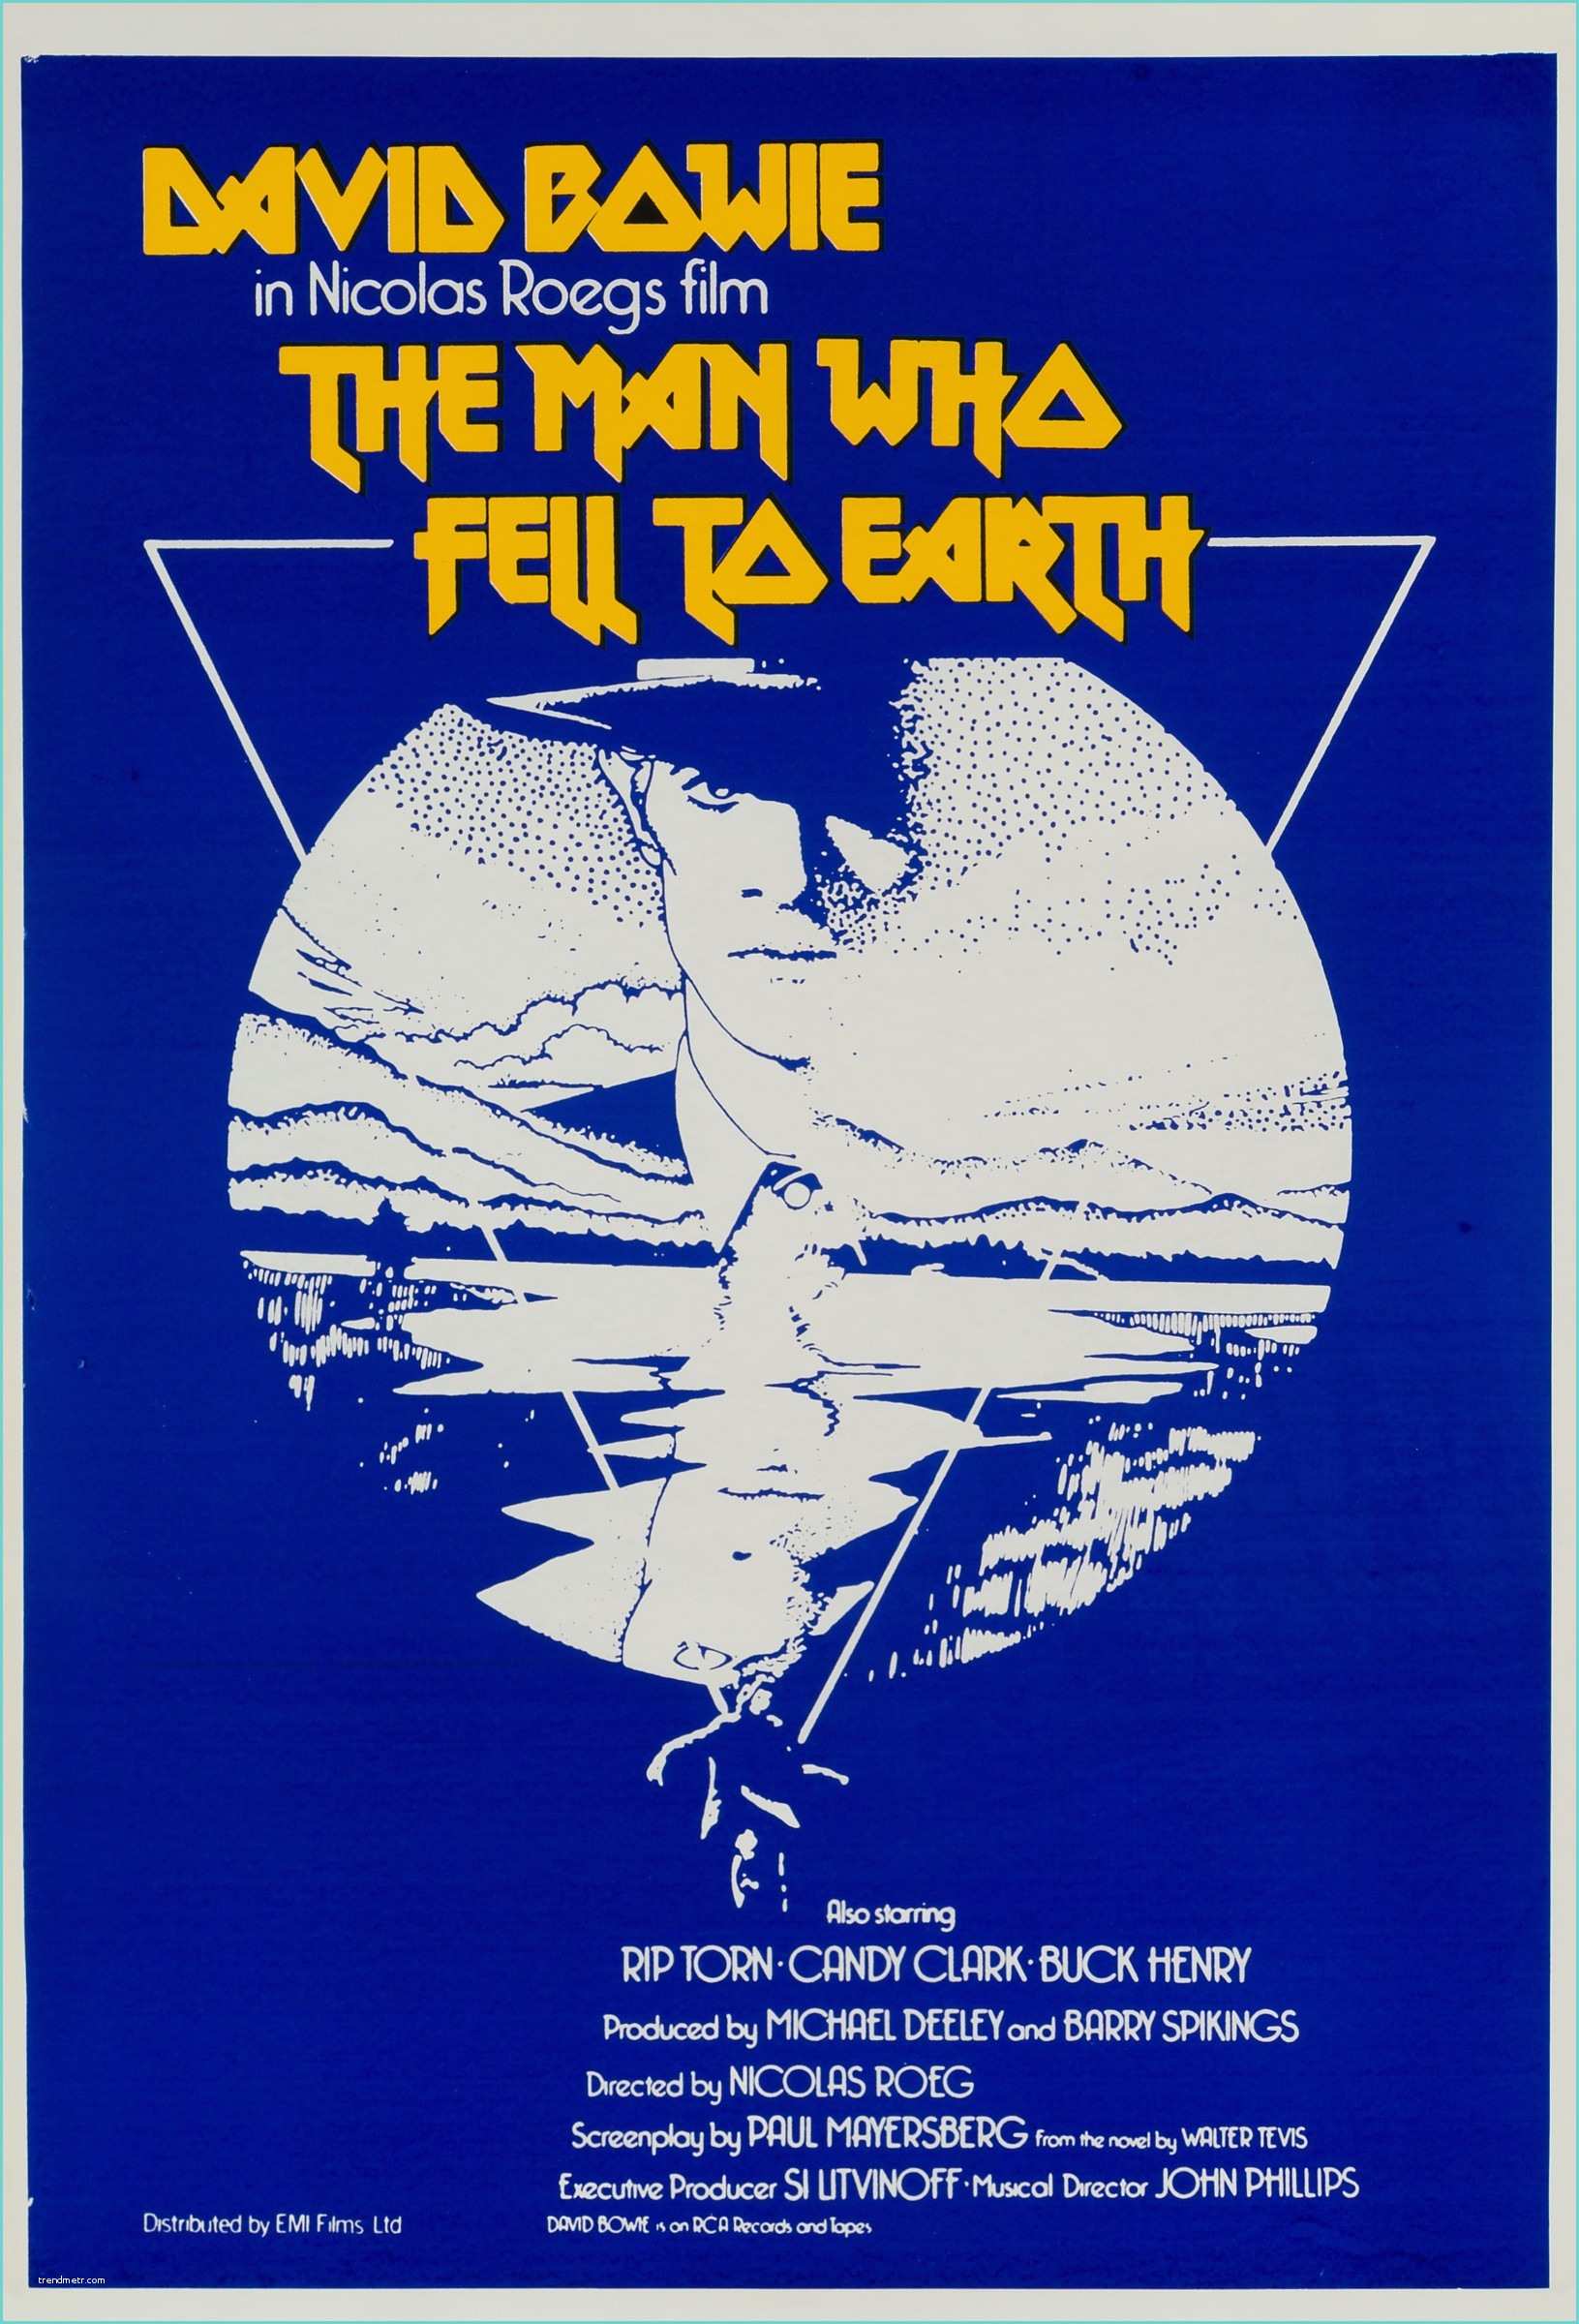 Allposters Return Policy Vic Fair the Man who Fell to Earth 1976